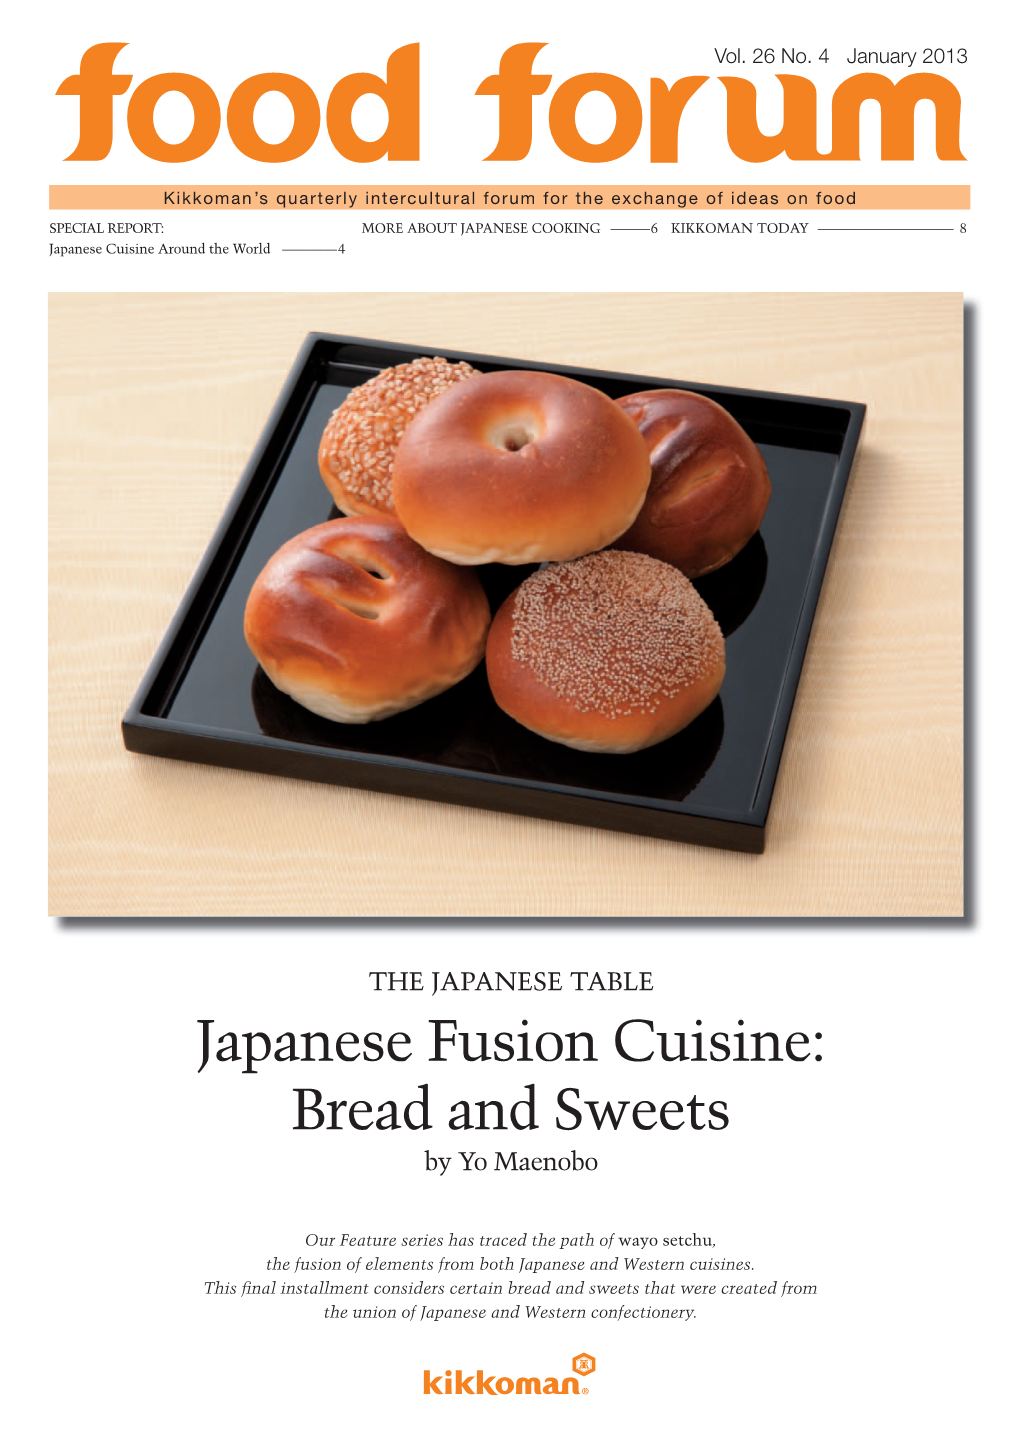 Japanese Fusion Cuisine: Bread and Sweets by Yo Maenobo